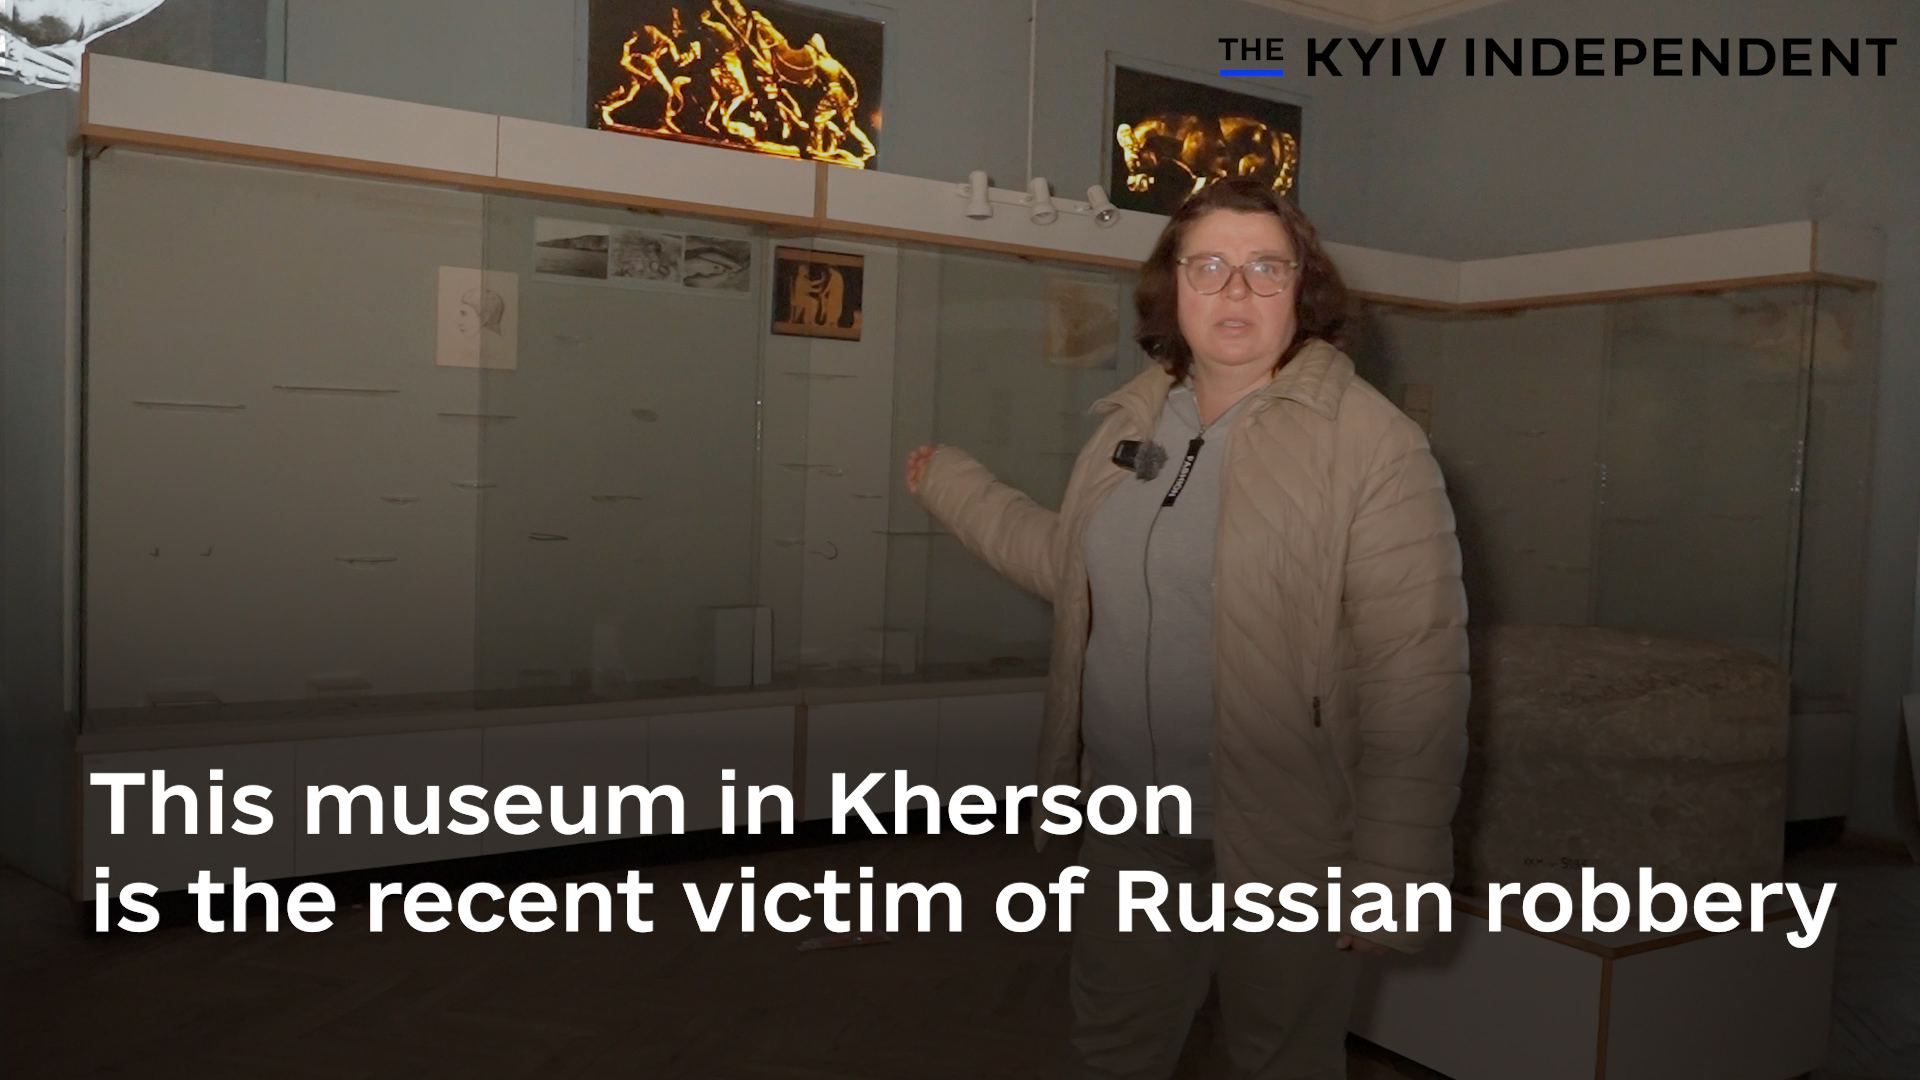 This museum in Kherson is the recent victim of Russian robbery